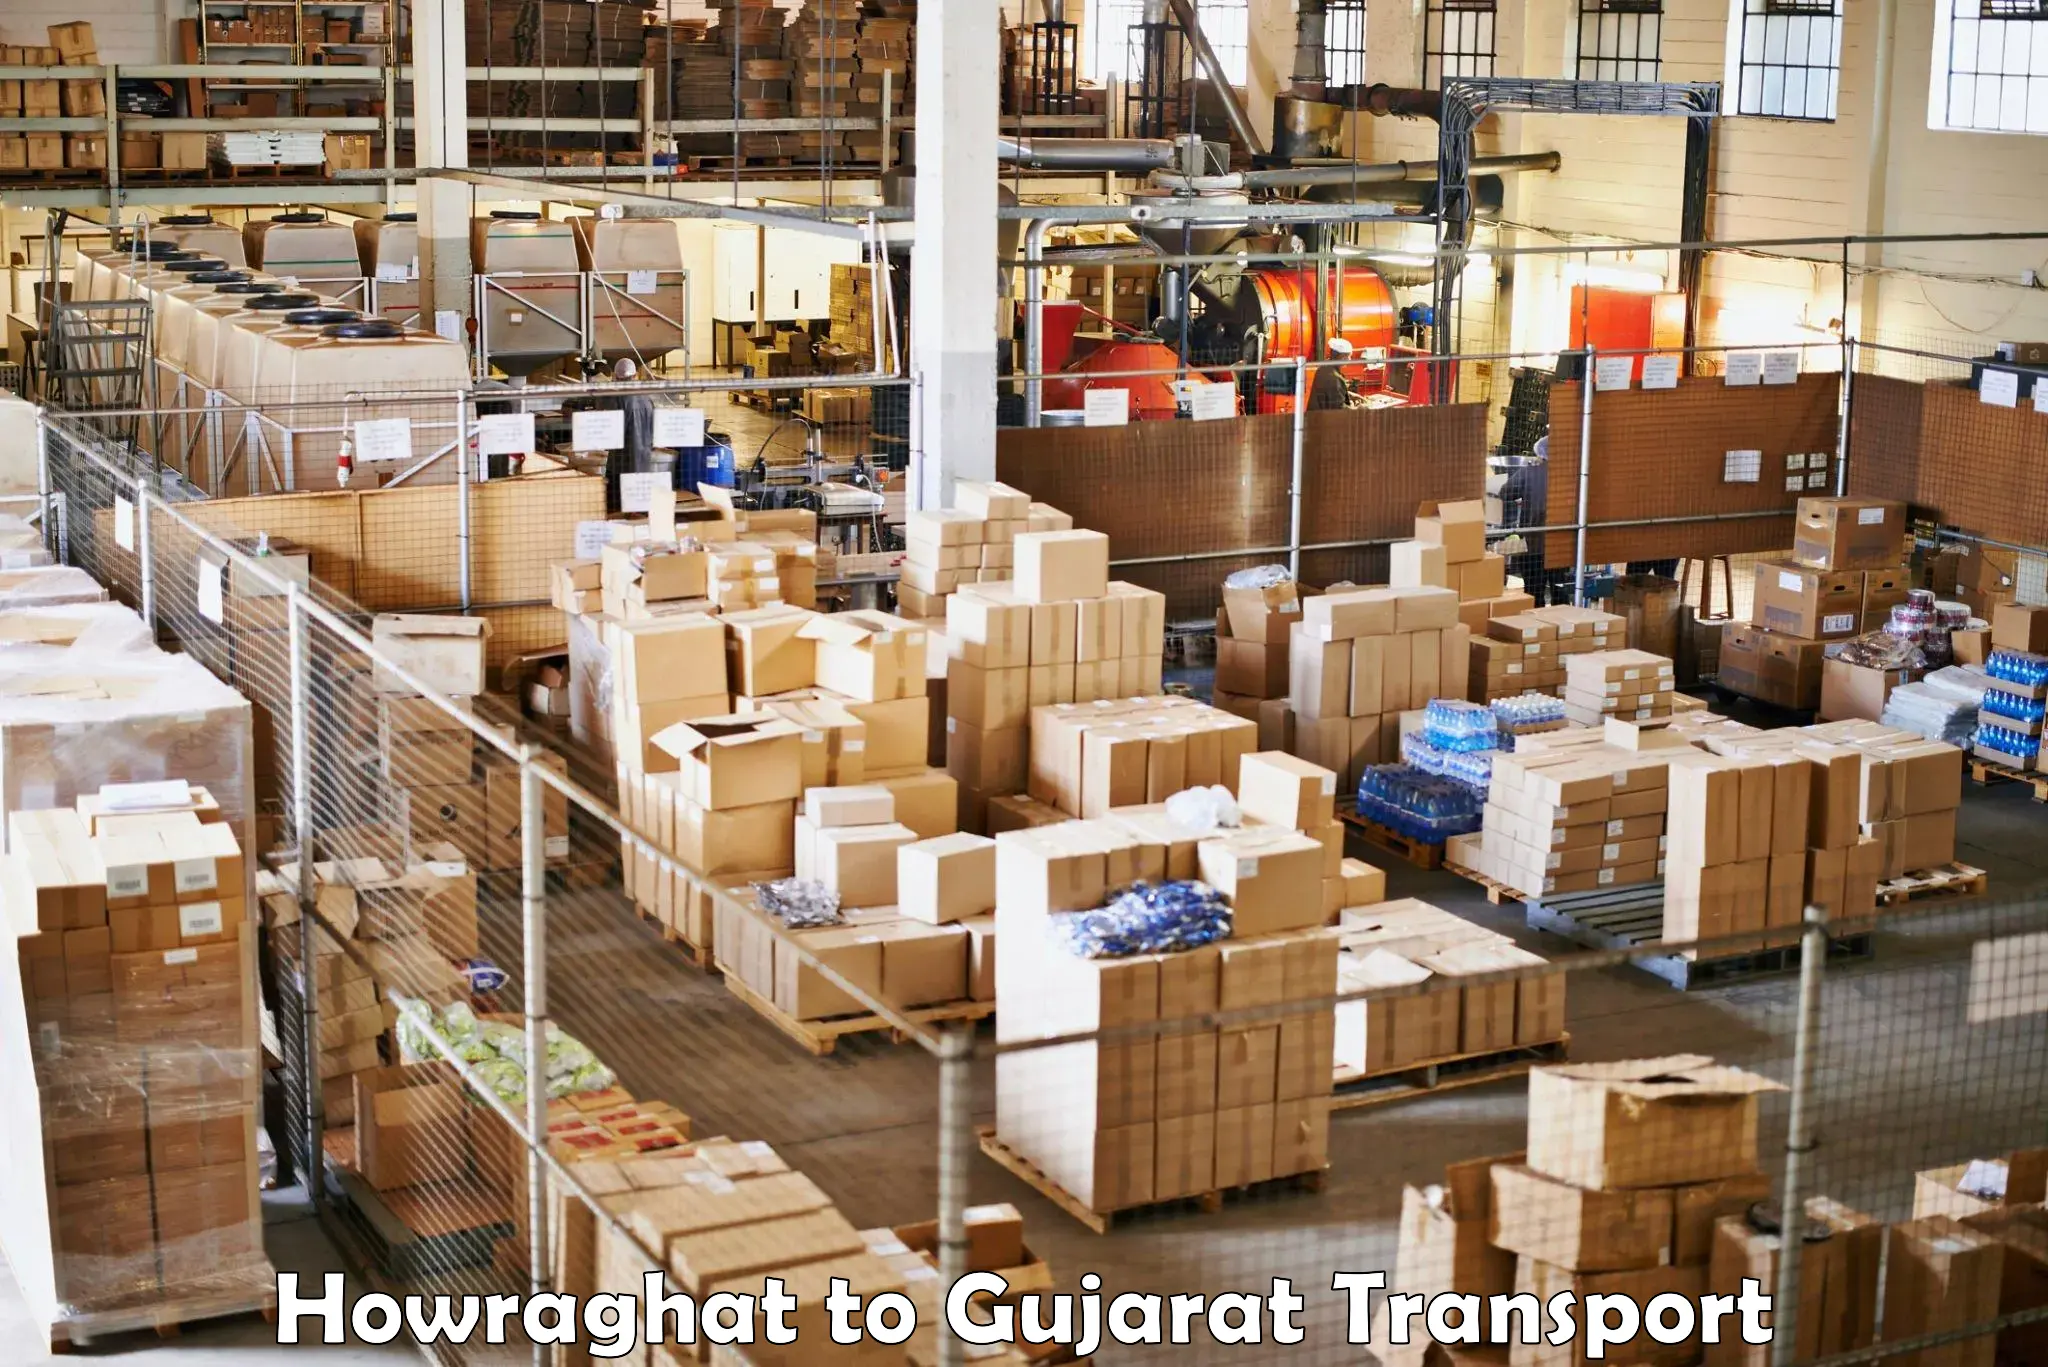 Parcel transport services Howraghat to Matar